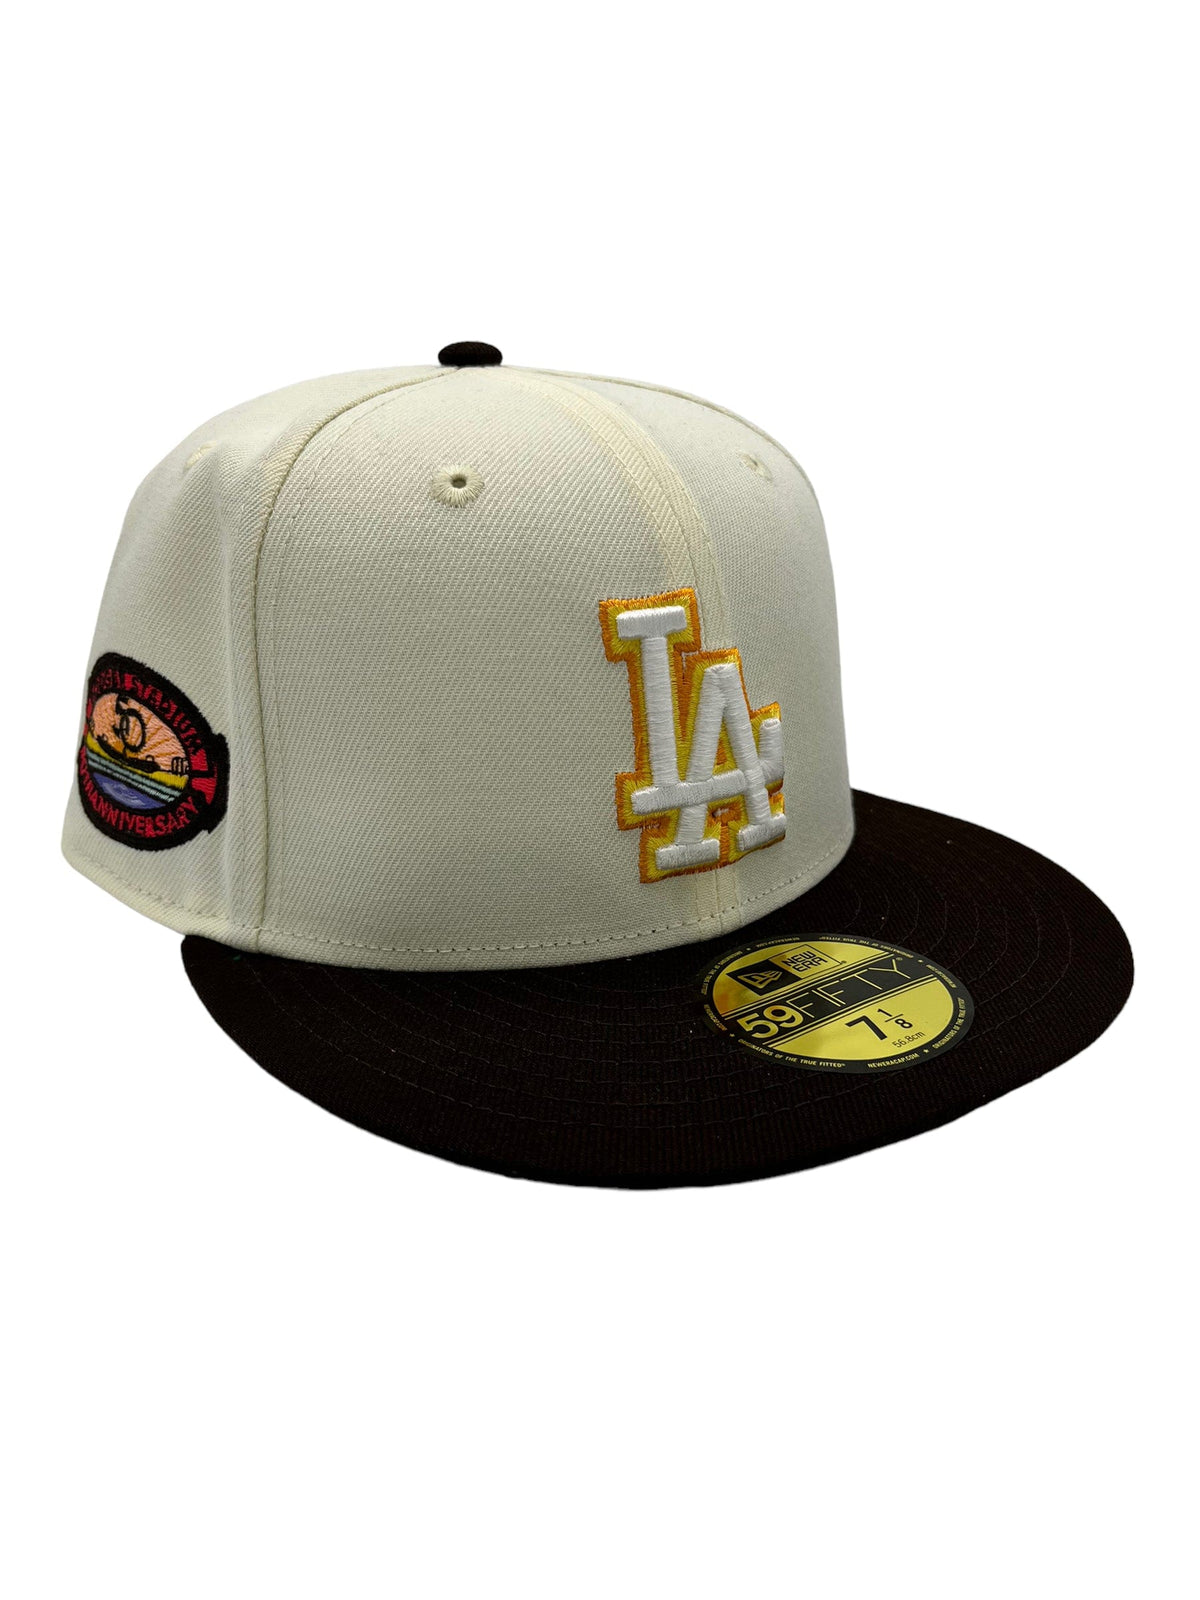 NEW ERA 59 FIFTY MLB LOS ANGELES DODGERS GOLD PROGRAM FITTED MENS HAT SZ 8  BLUE